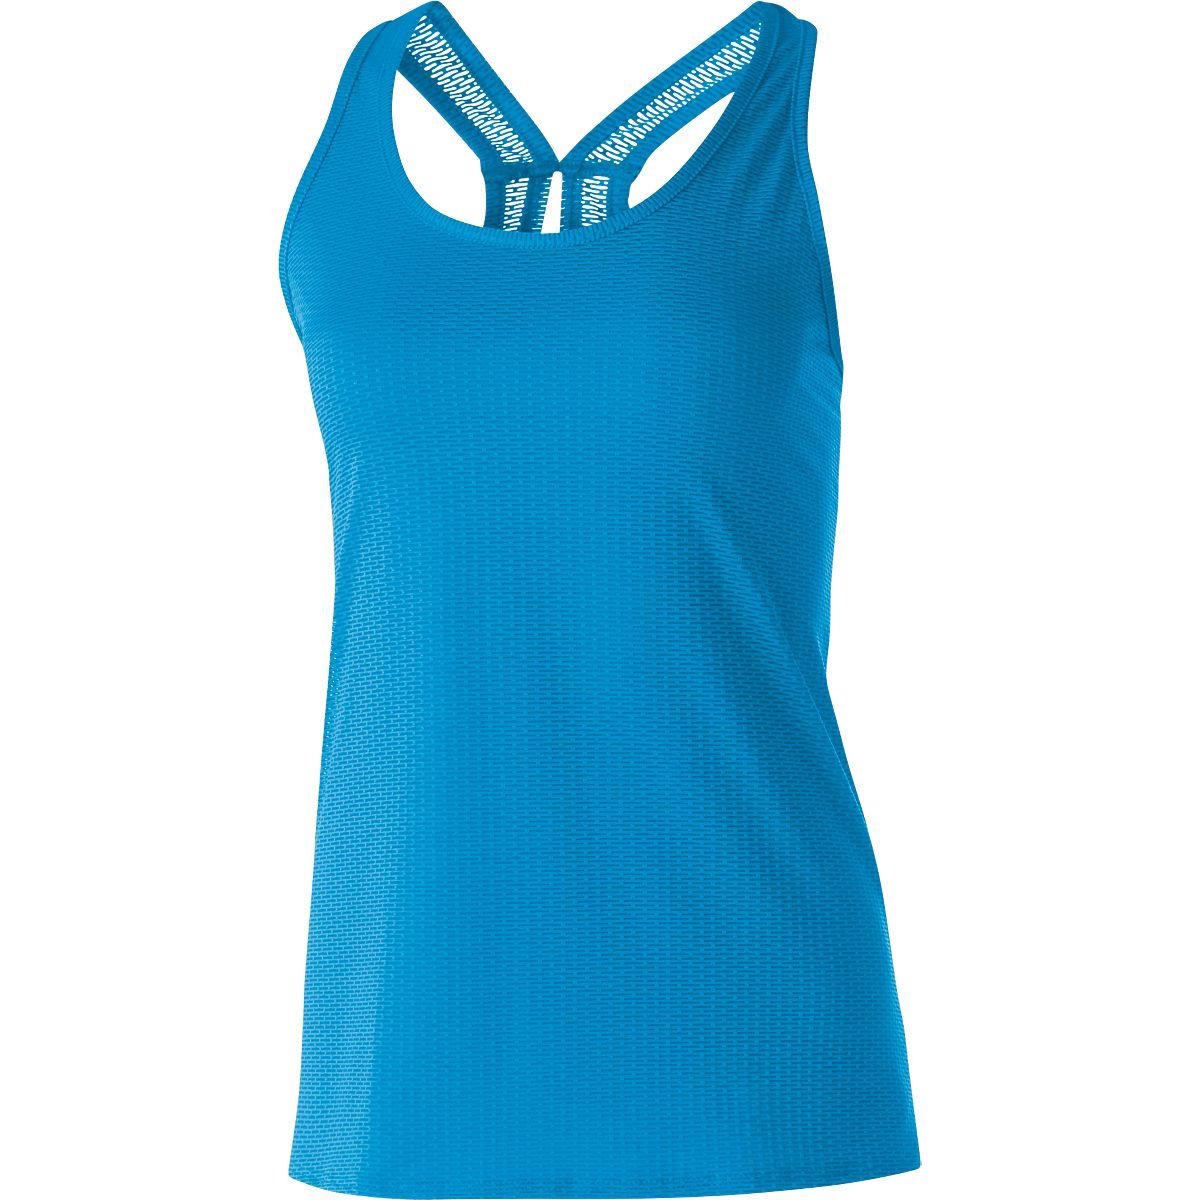 Holloway Ladies Precision Tank in Bright Blue  -Part of the Ladies, Ladies-Tank, Holloway, Shirts product lines at KanaleyCreations.com